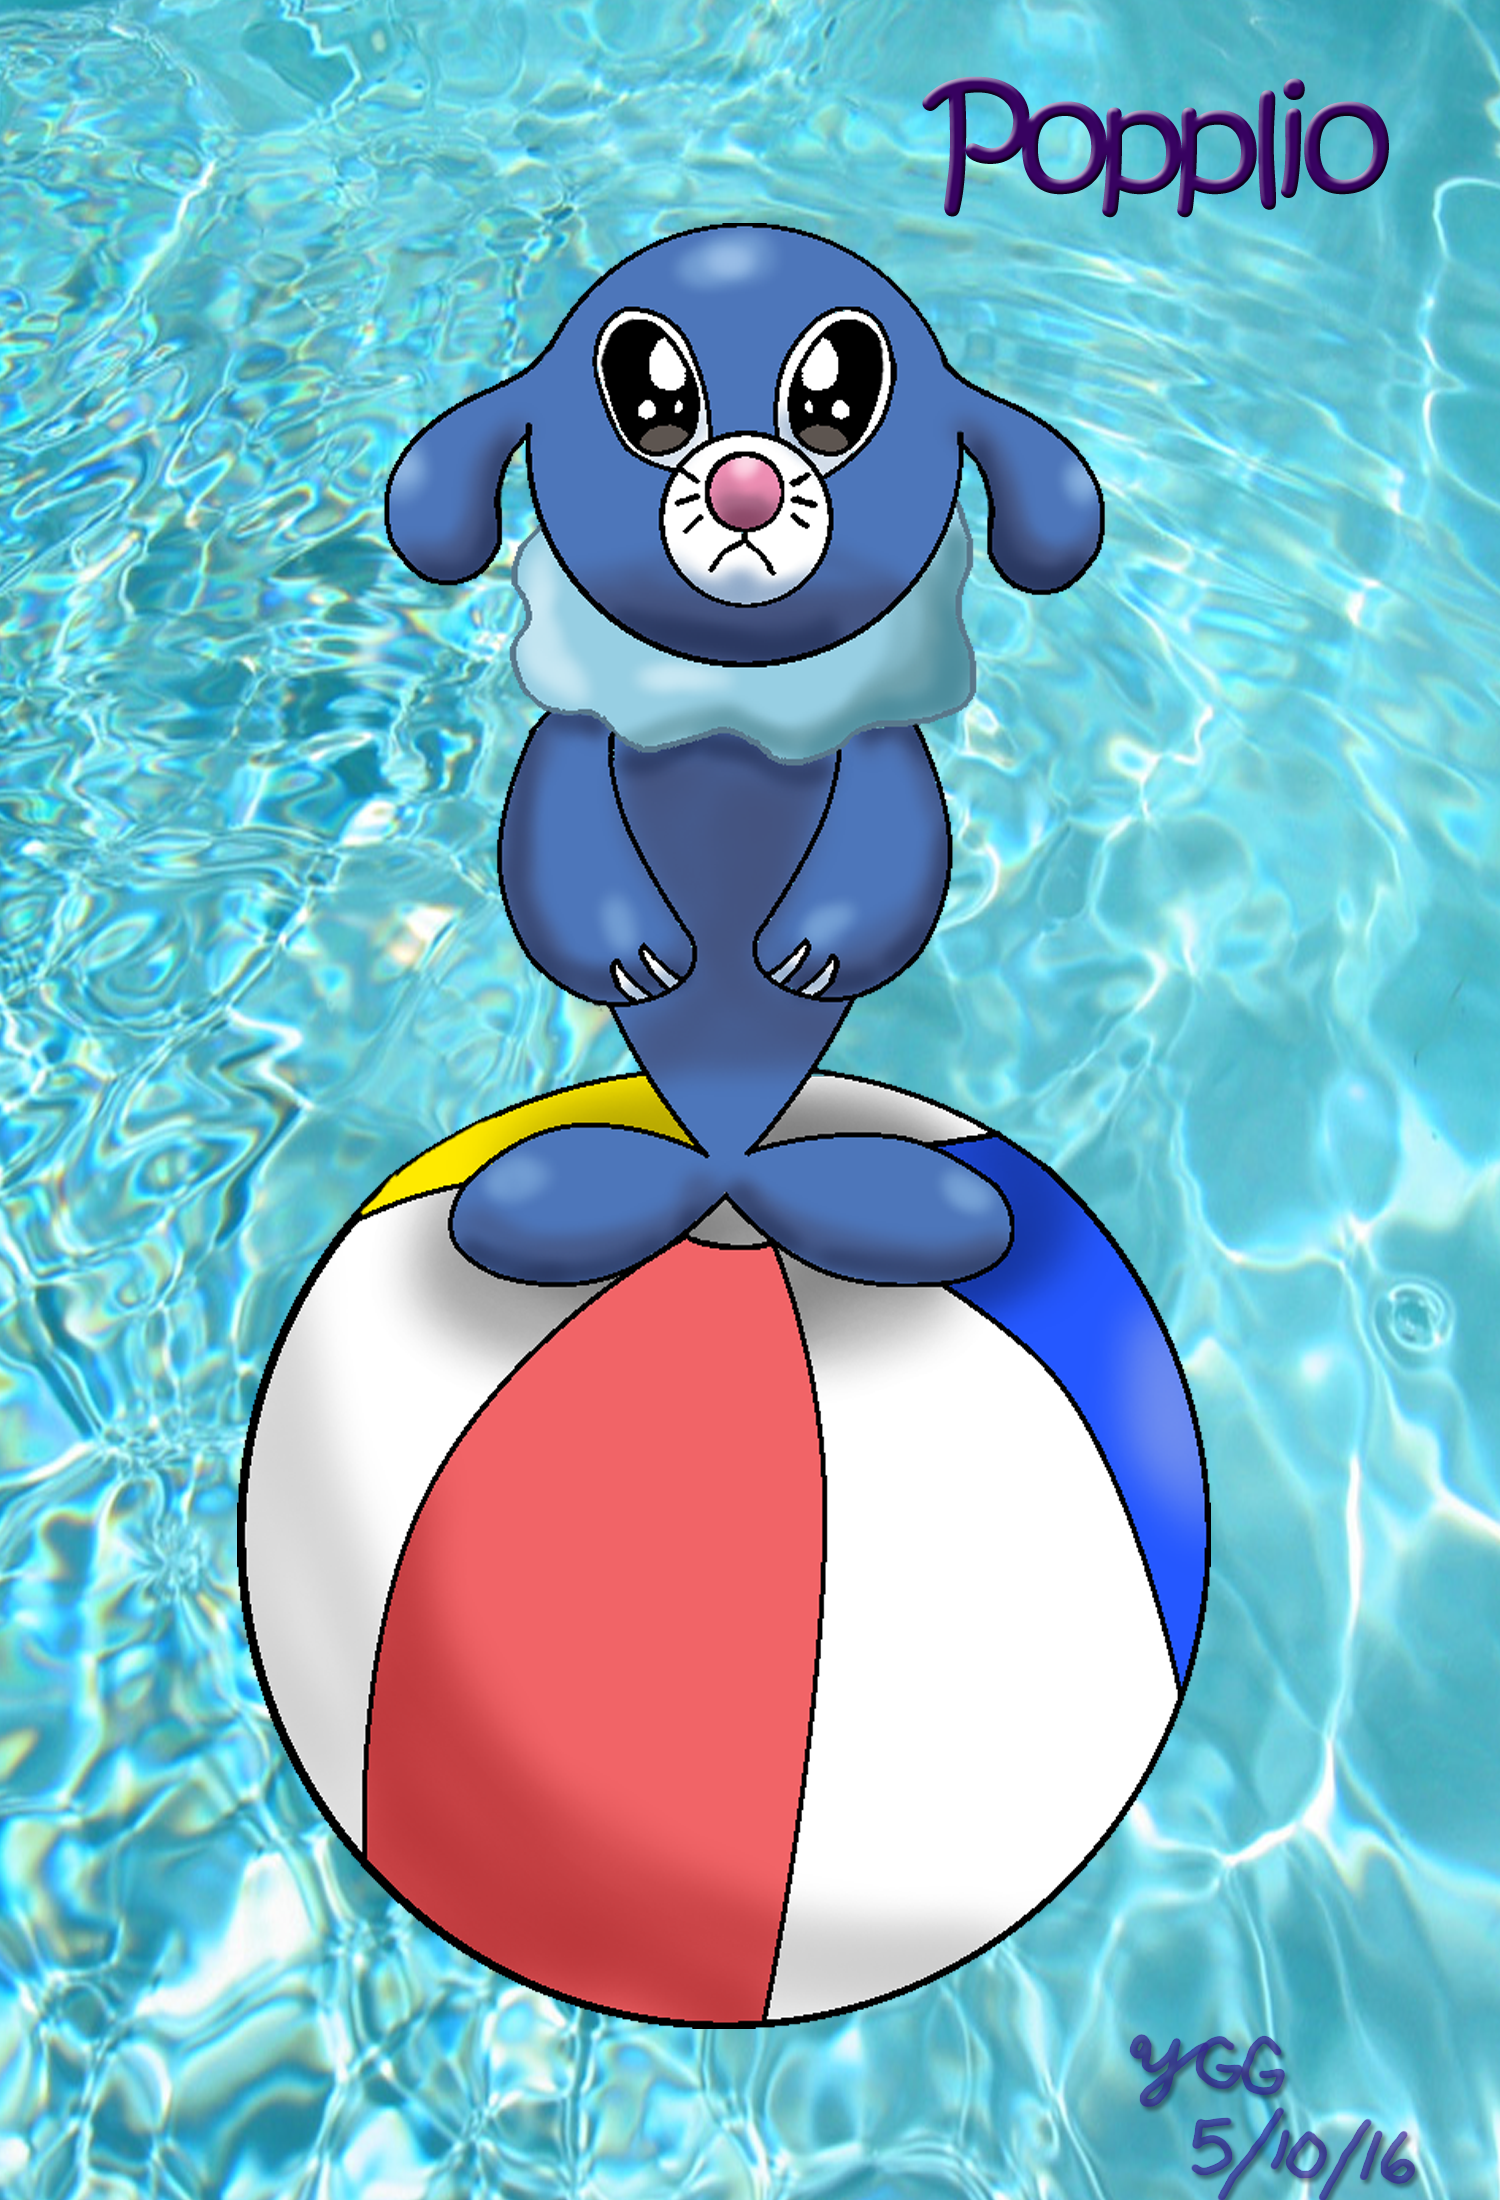 popplio_wants_you_to_love_it_by_yoshigamergirl-da2470s.png